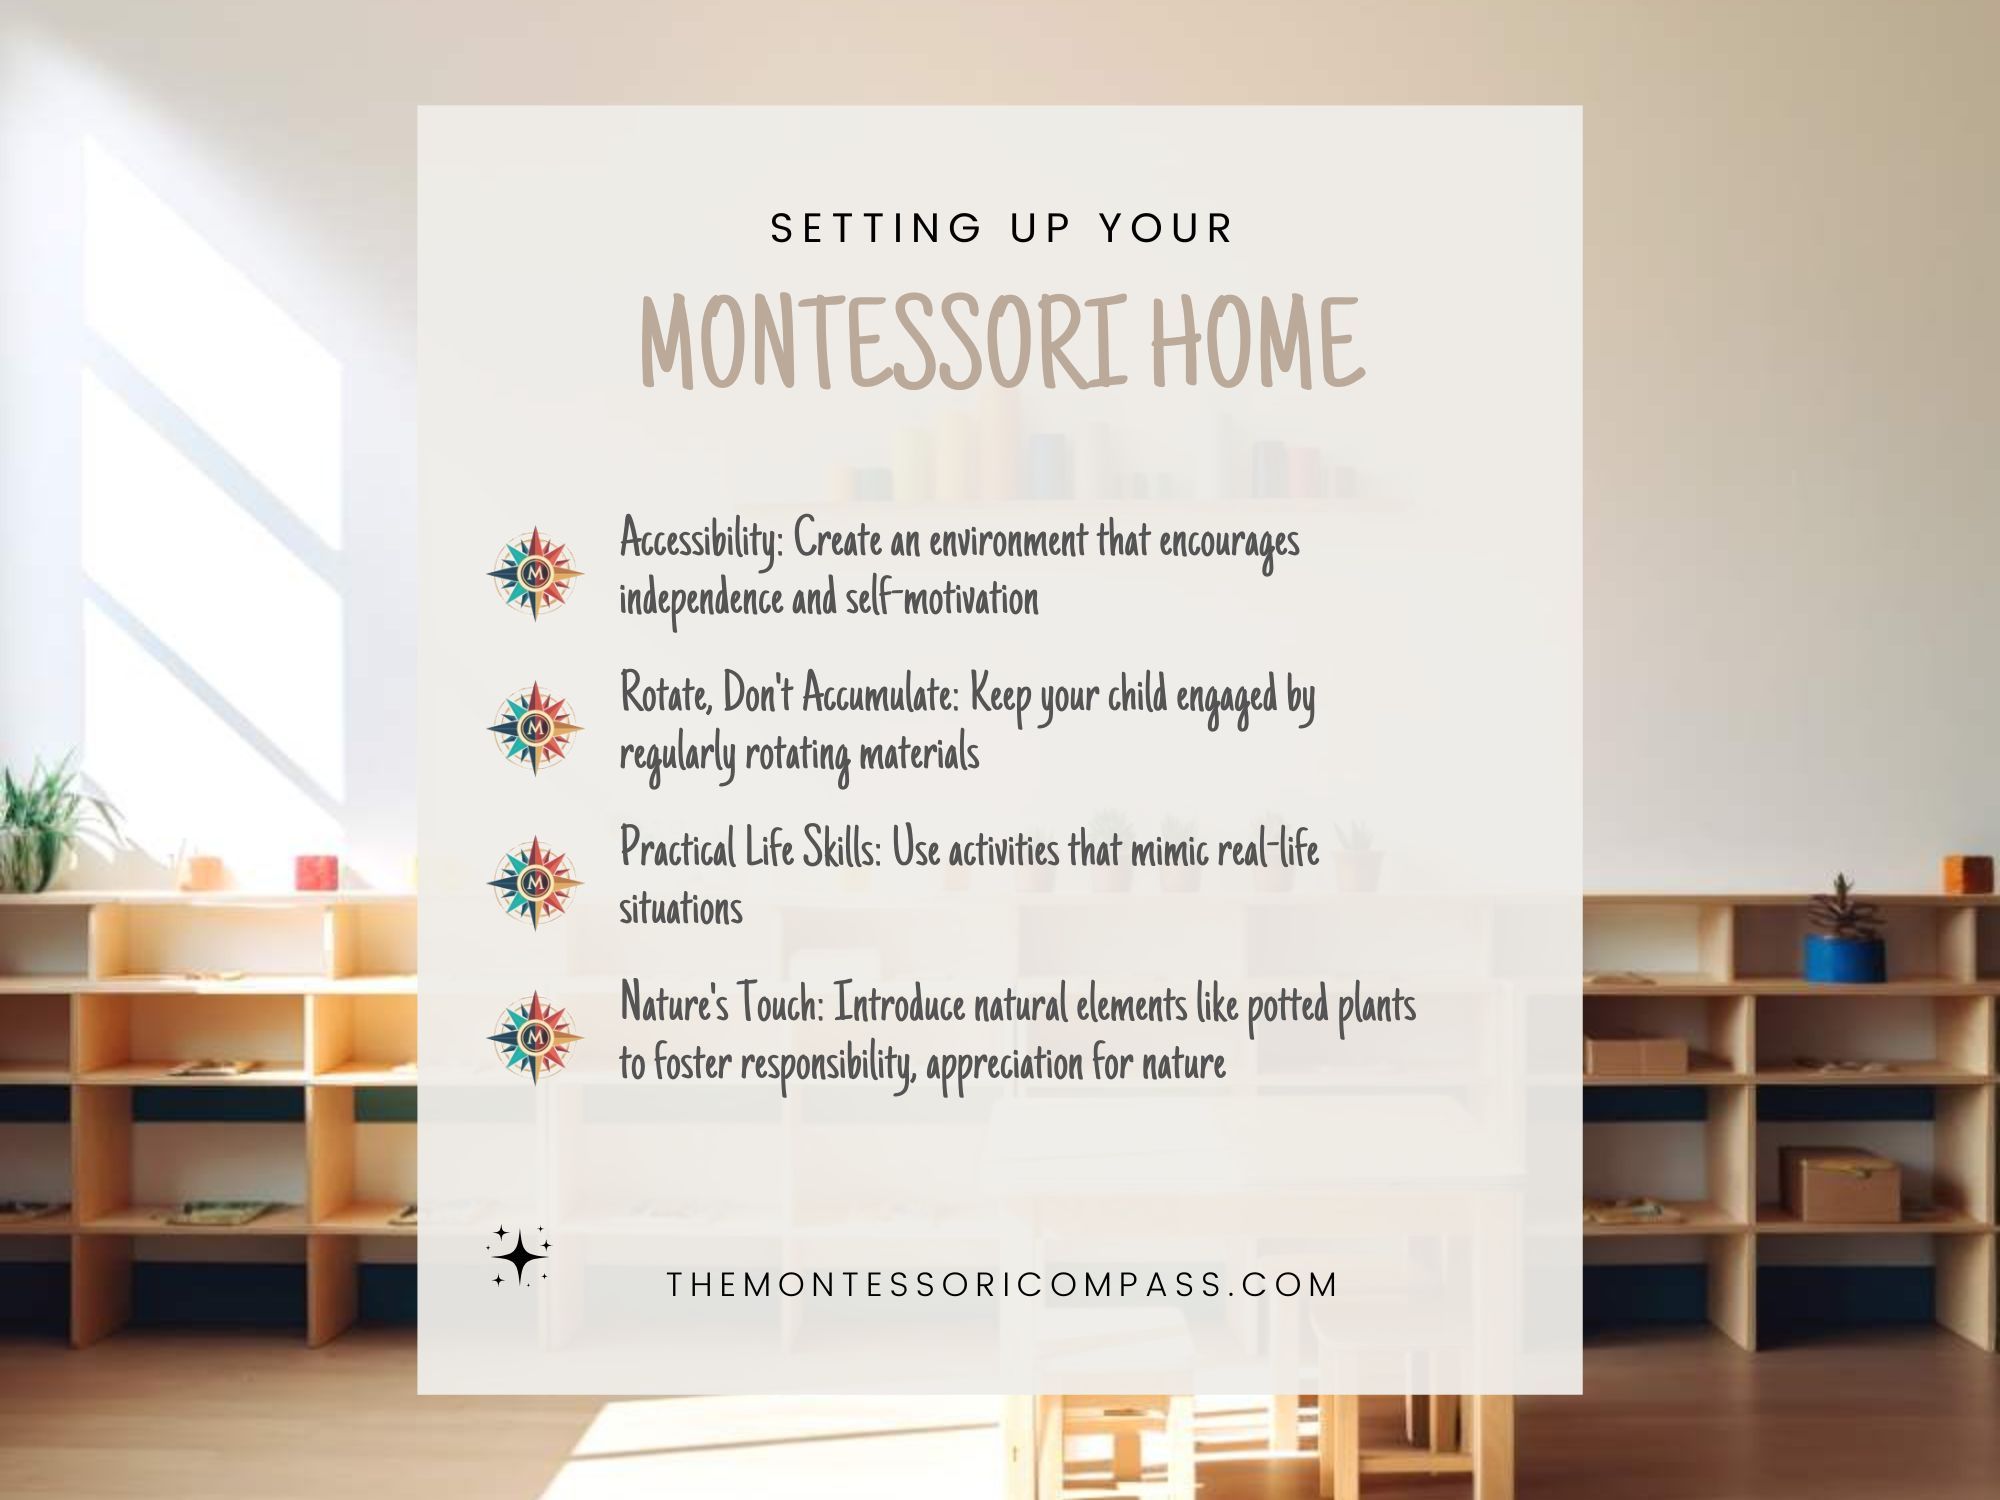 Thriving with Montessori for 2-Year-Olds: Why It Works!